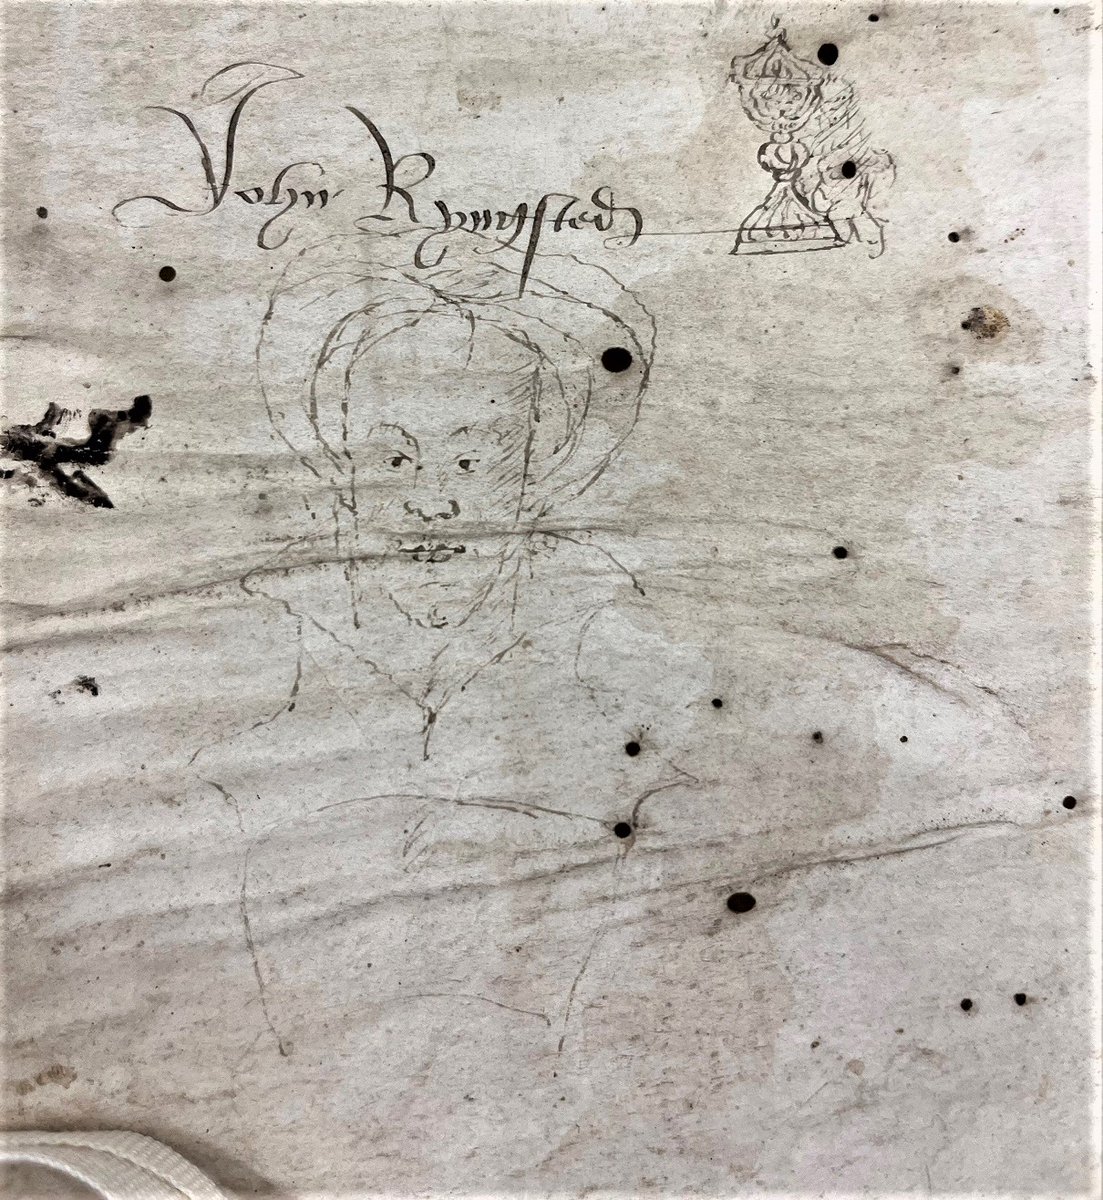 Any #Tudor #FashionHistory experts out there able to solve this #ArchiveMystery? This sketch was assumed to be John Rynsted (the name written above) but we think it may be a woman wearing a partlet and French hood. 
#Archive30 #twitterstorians